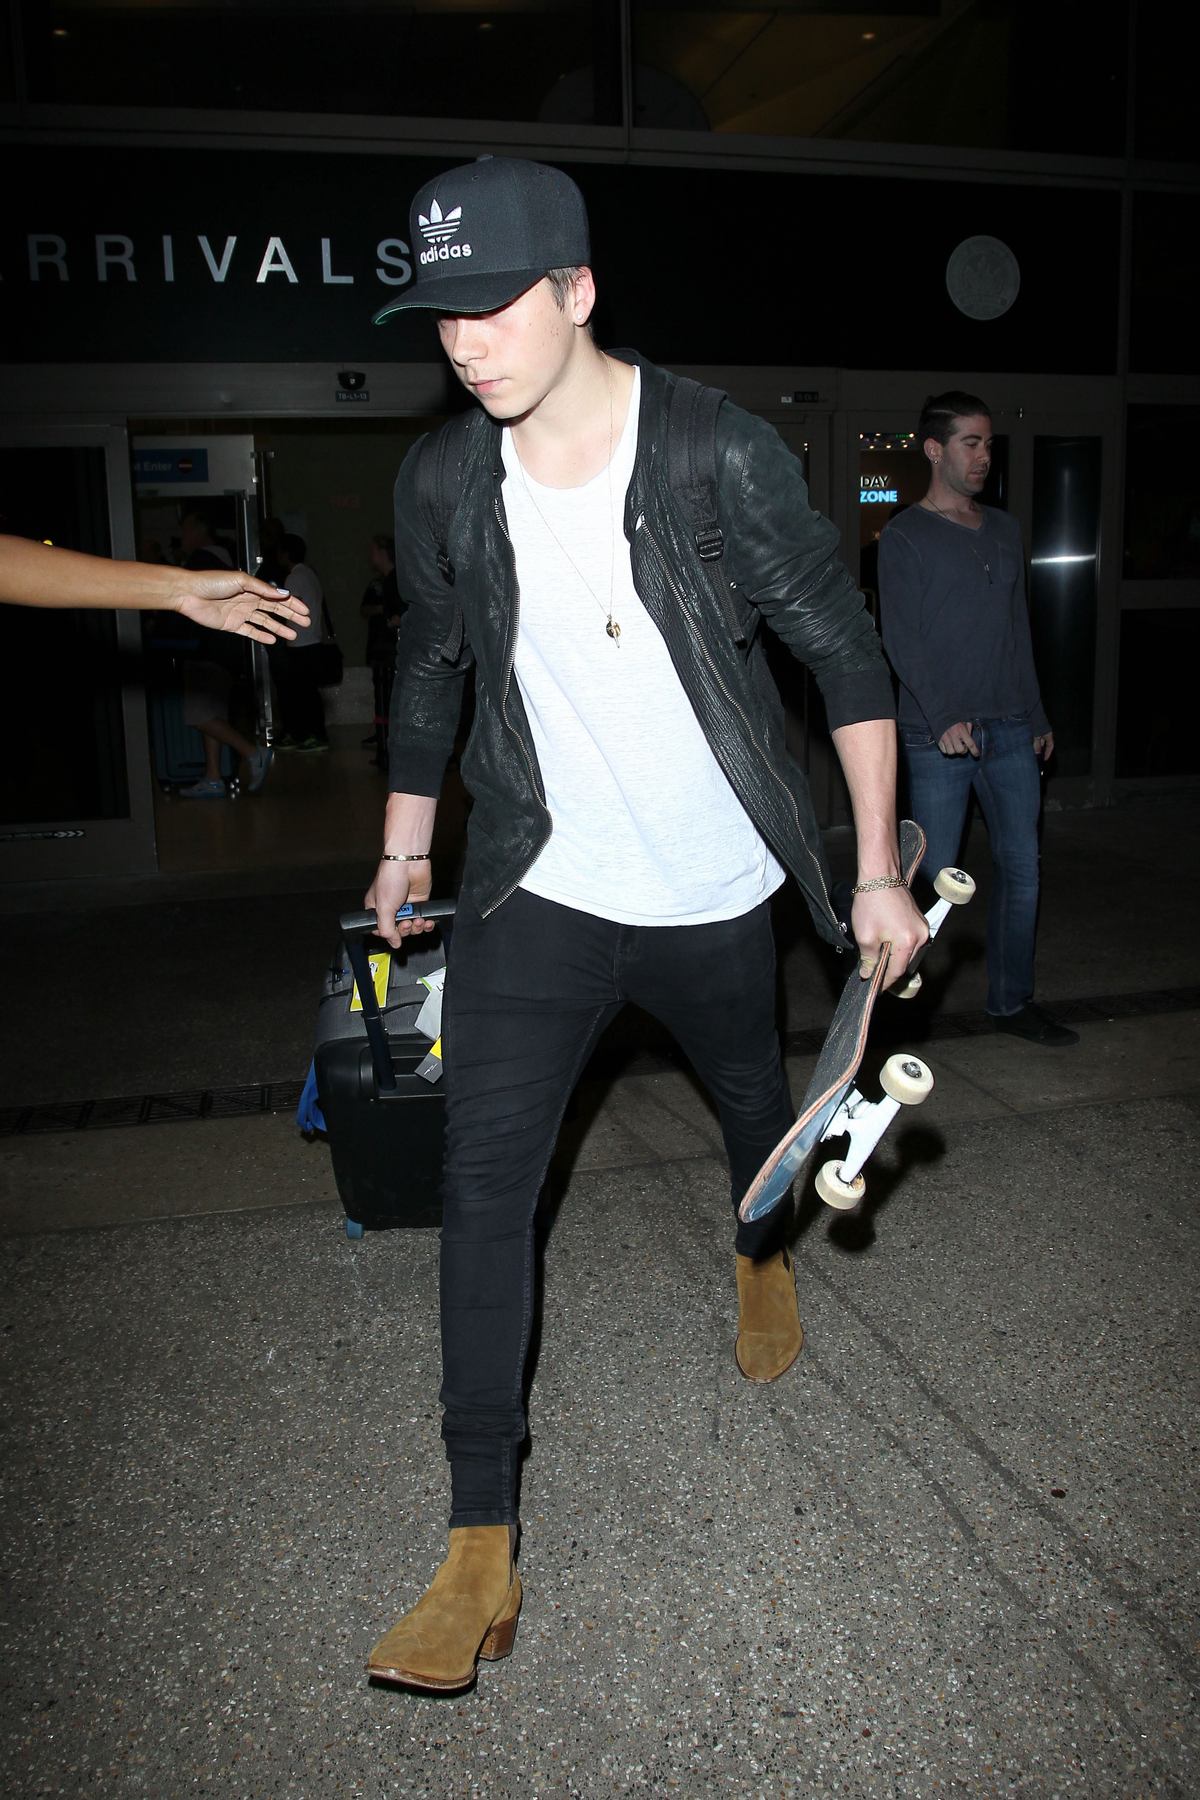 Brooklyn Beckham Arrives at LAX Airport with Skateboard